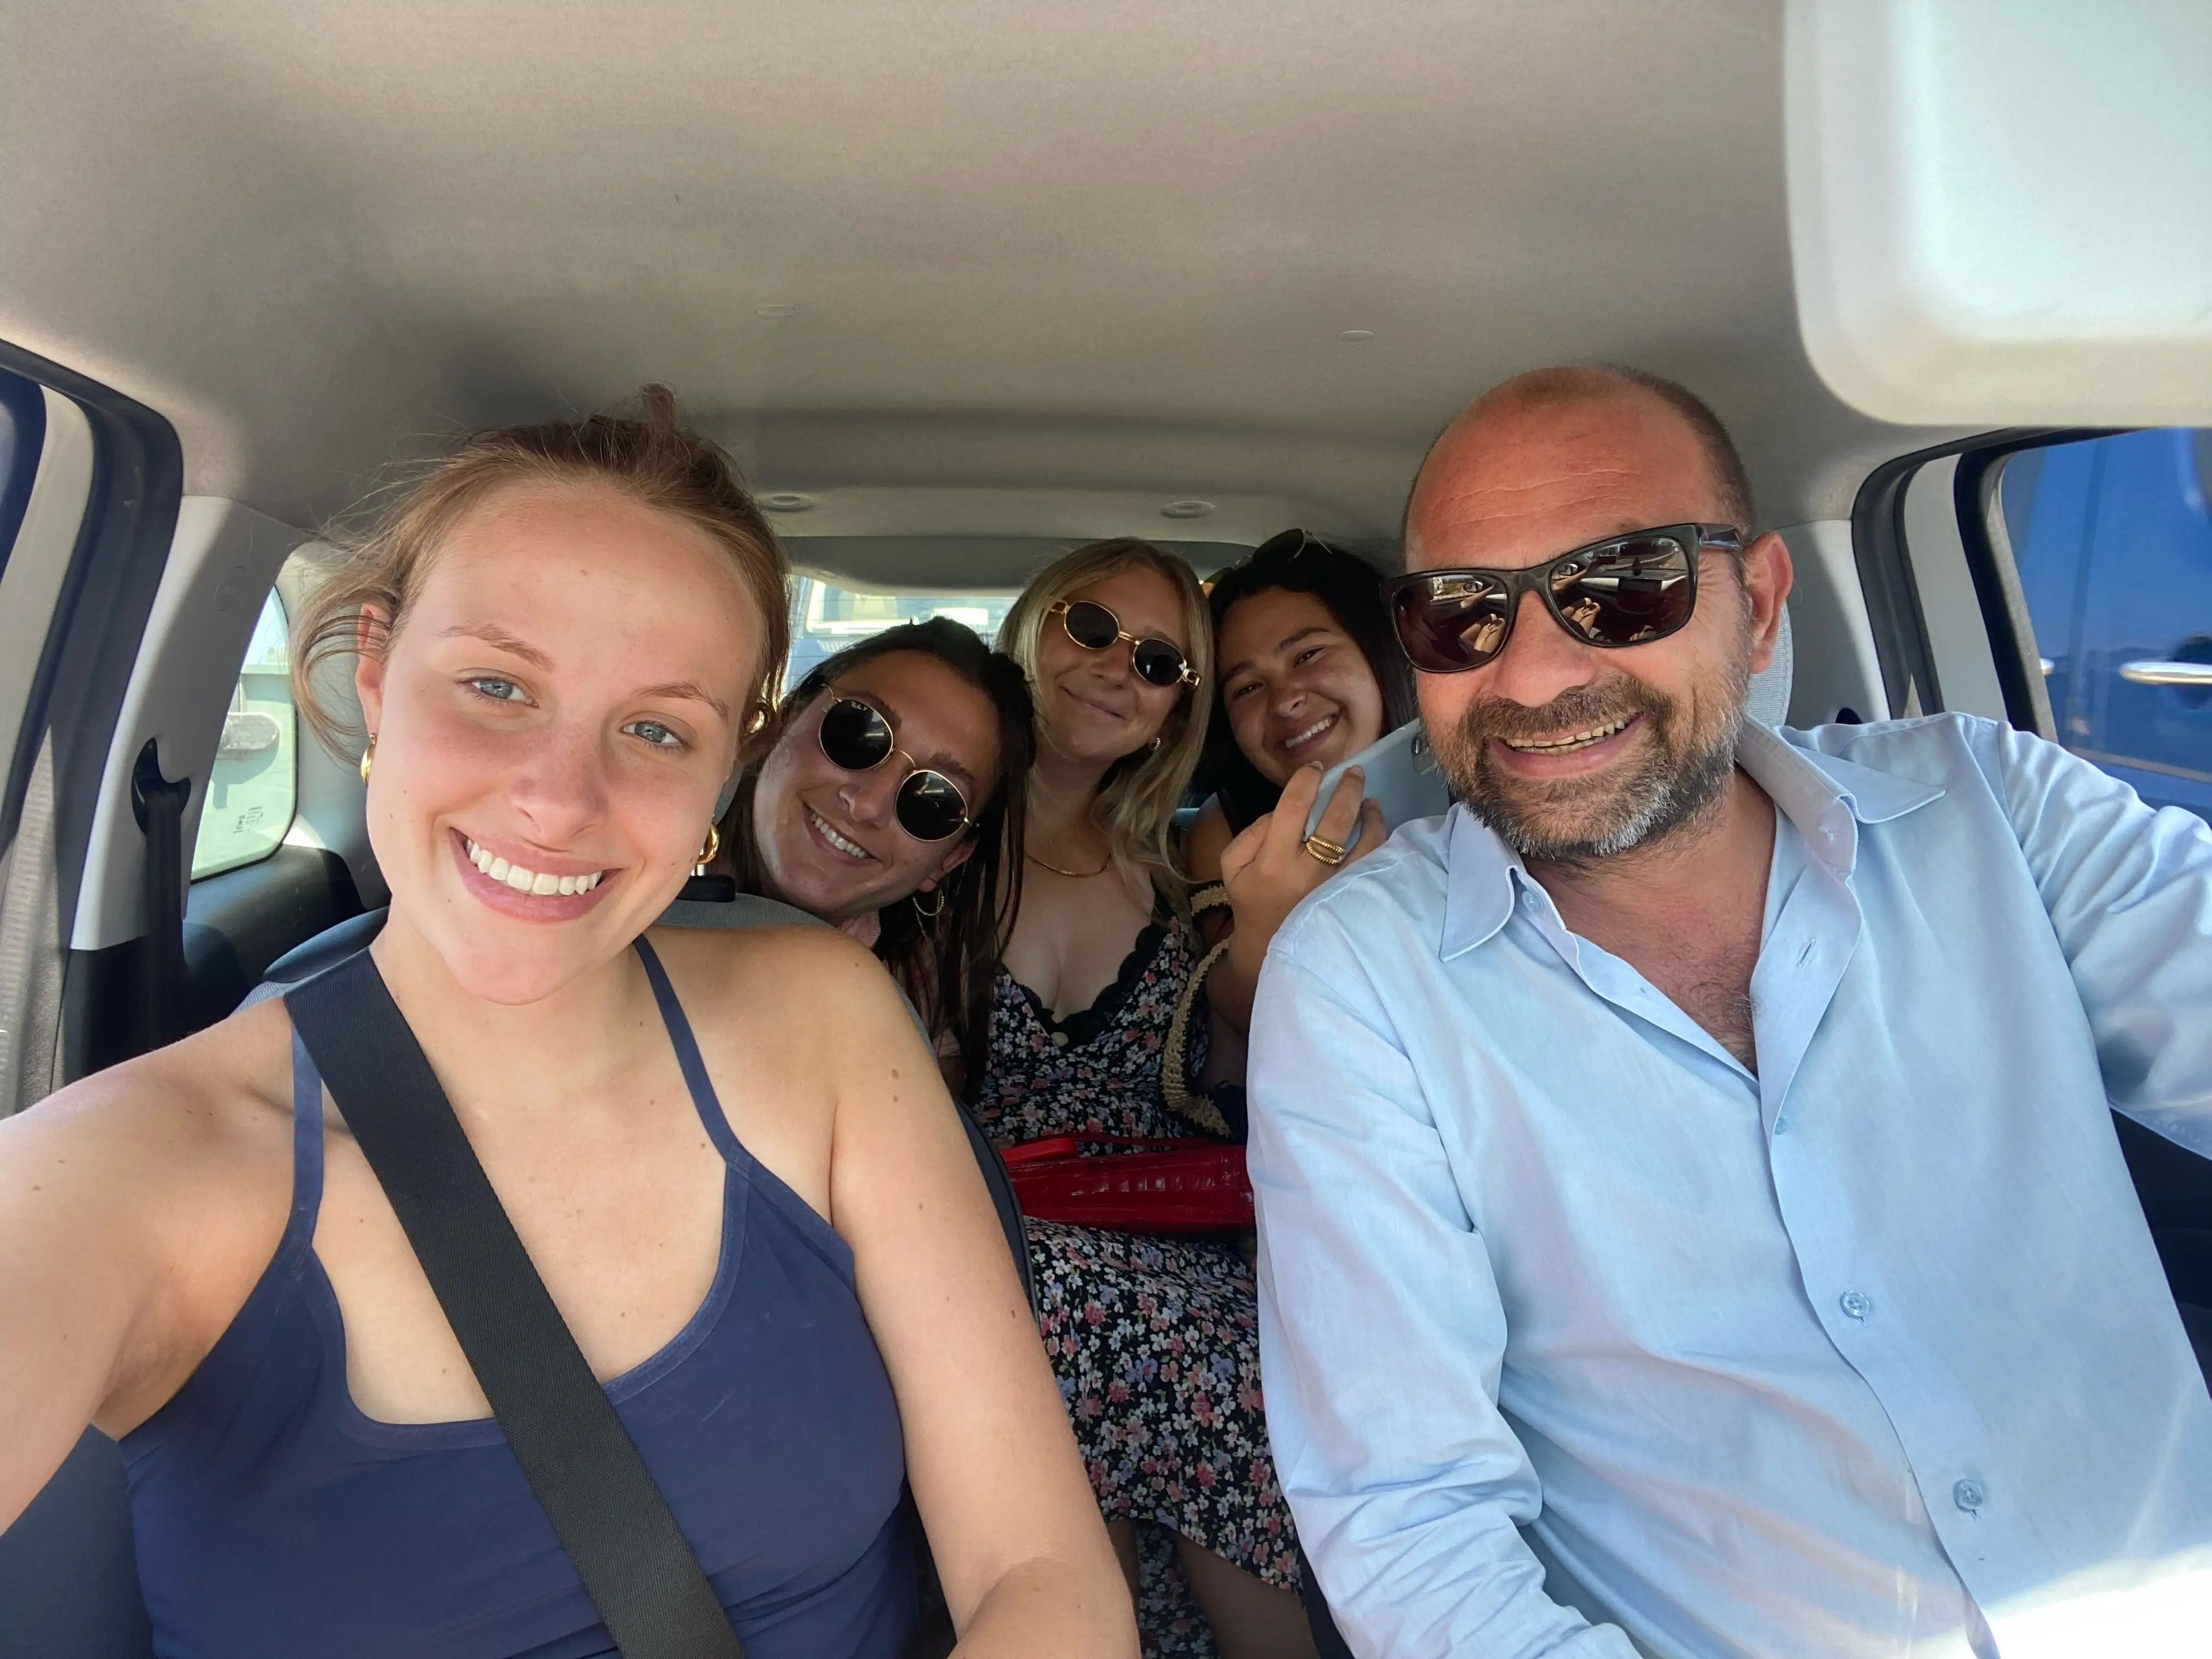 jordana and her friends taking a selfie in a car with their airbnb host